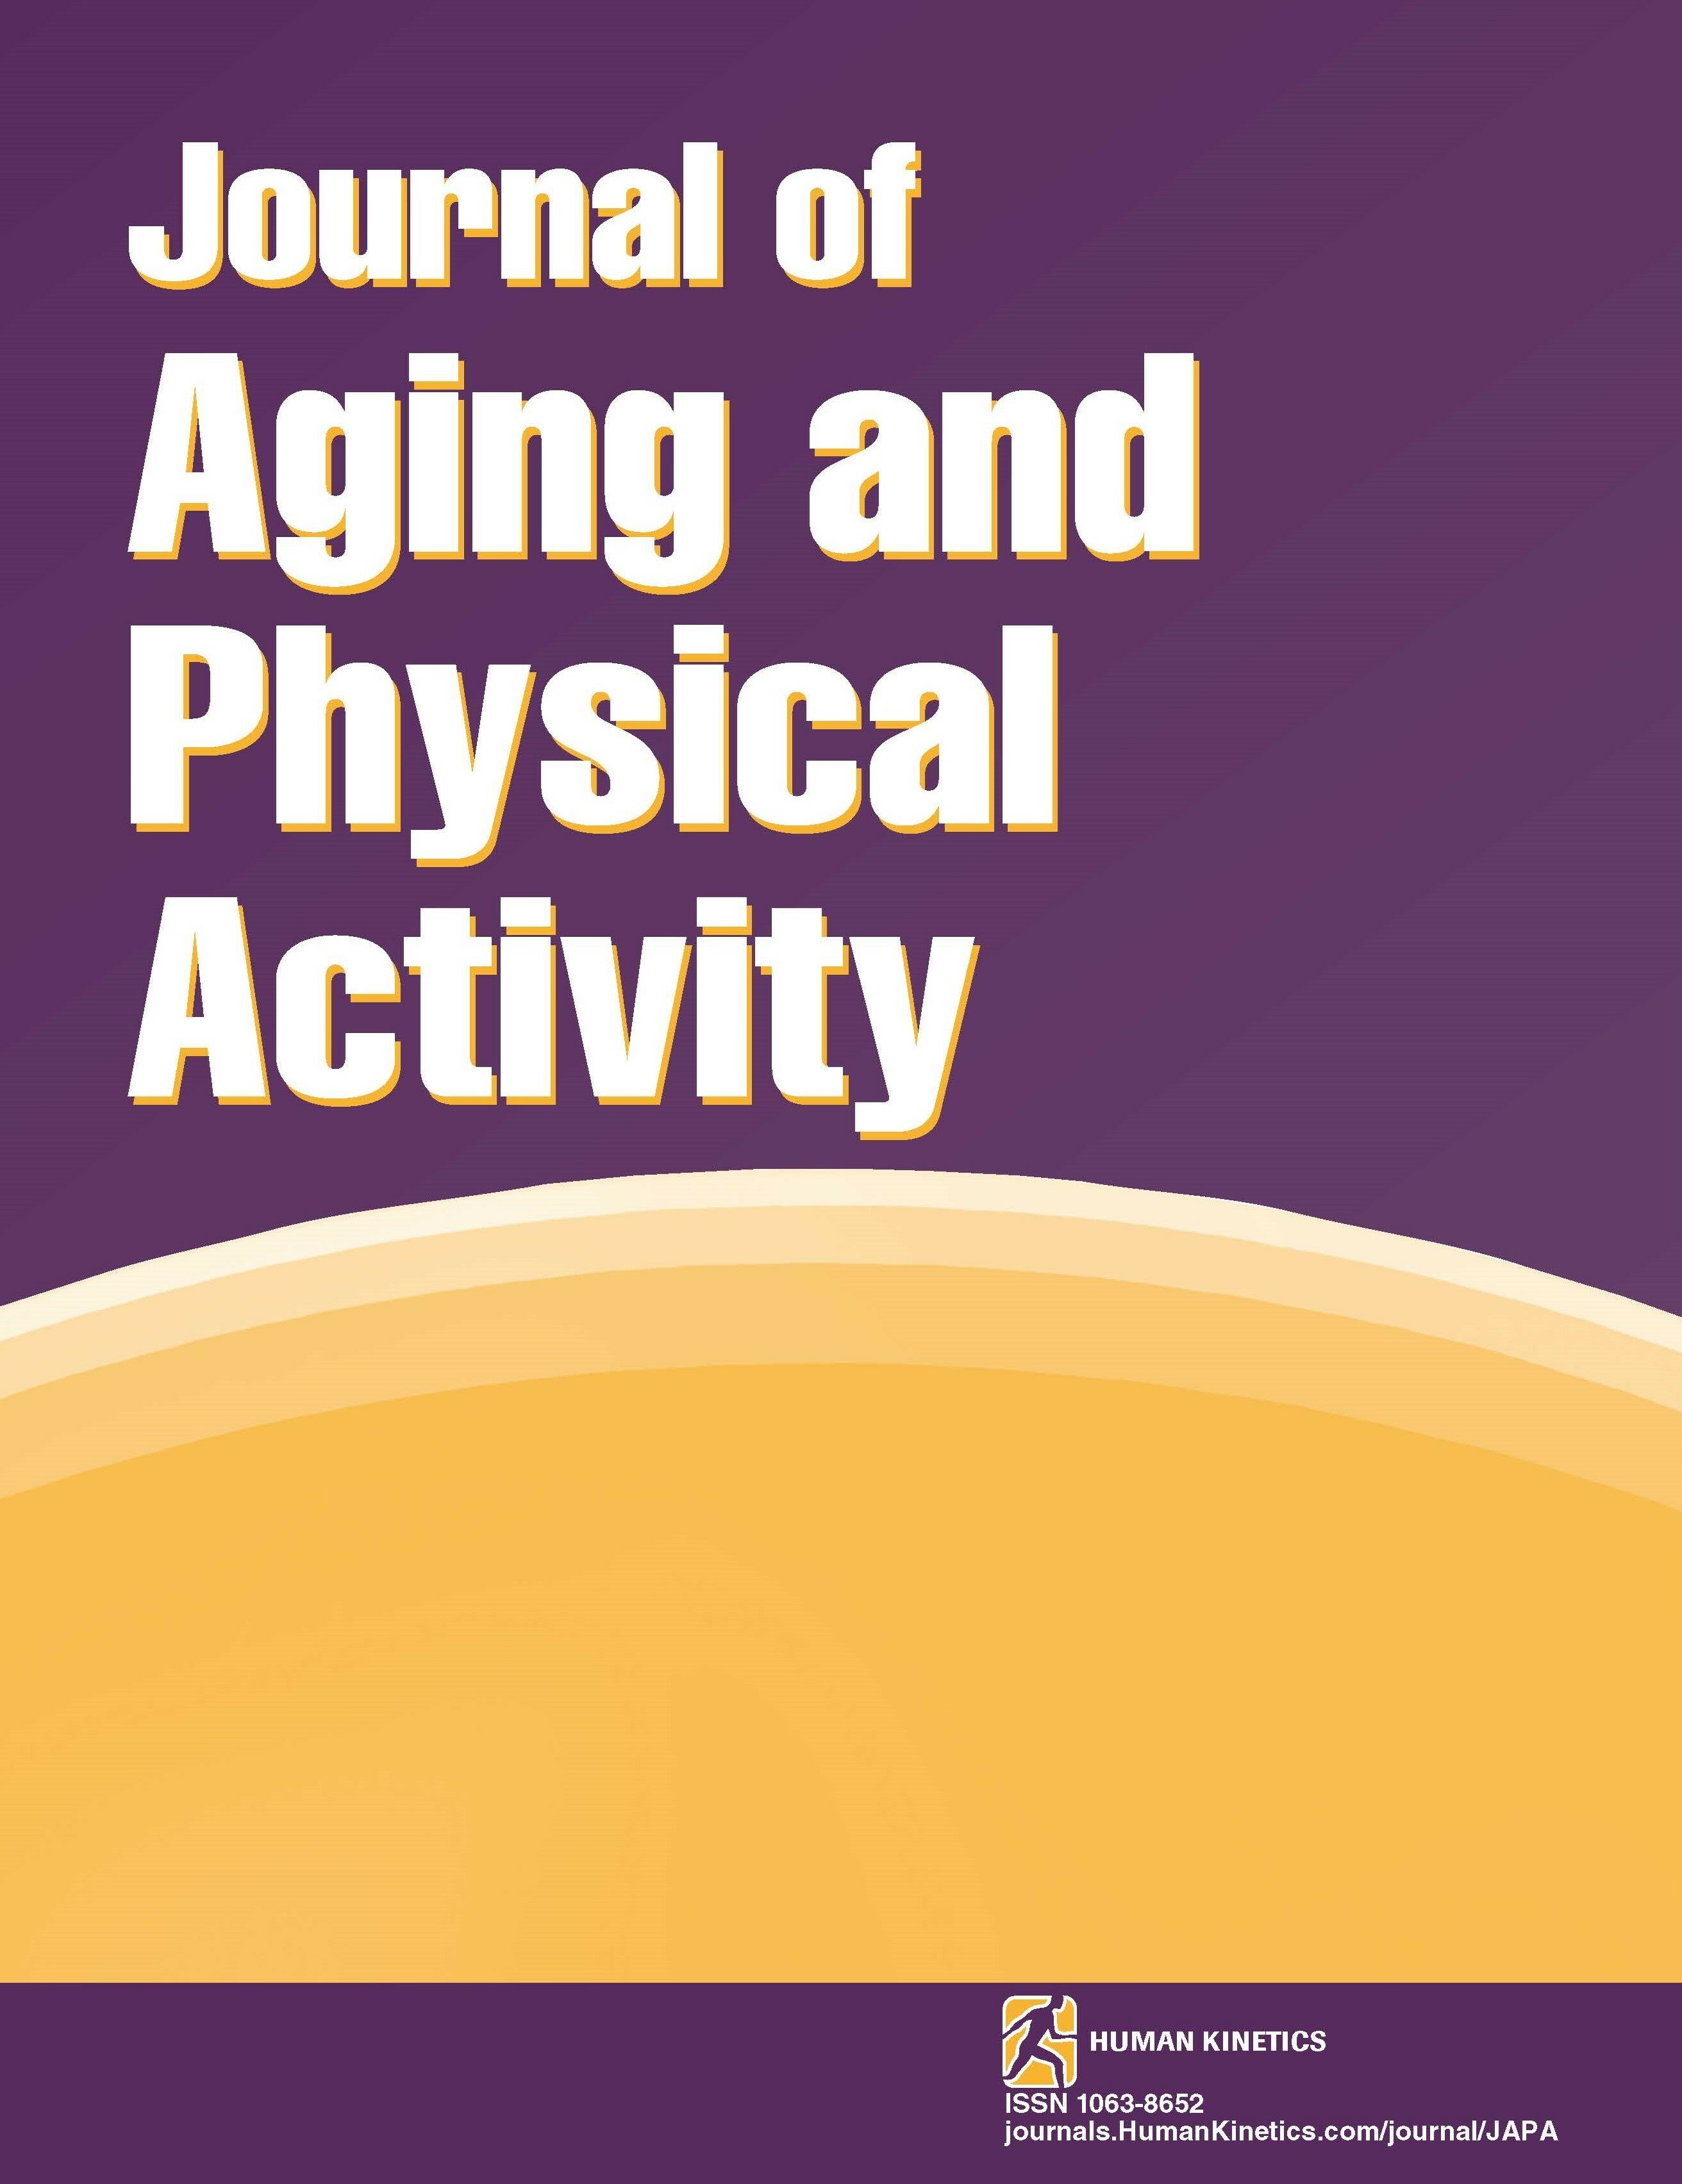 Psychometric Properties of the Turkish Adaptation of the Yale Physical Activity Survey